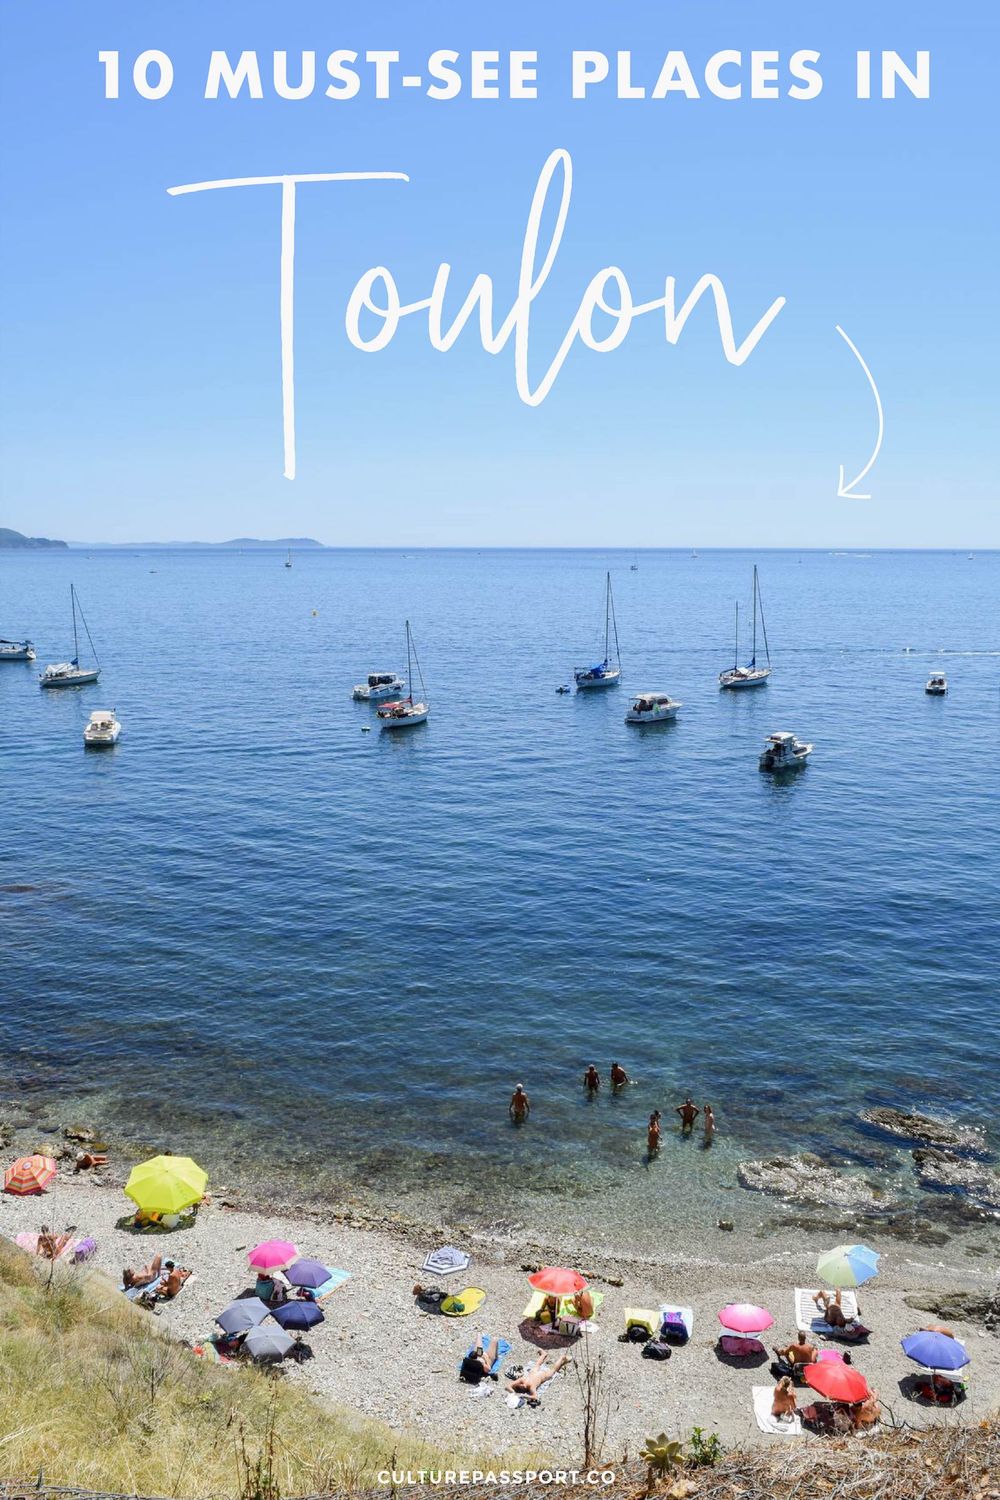 10 Must See Places Toulon, France!